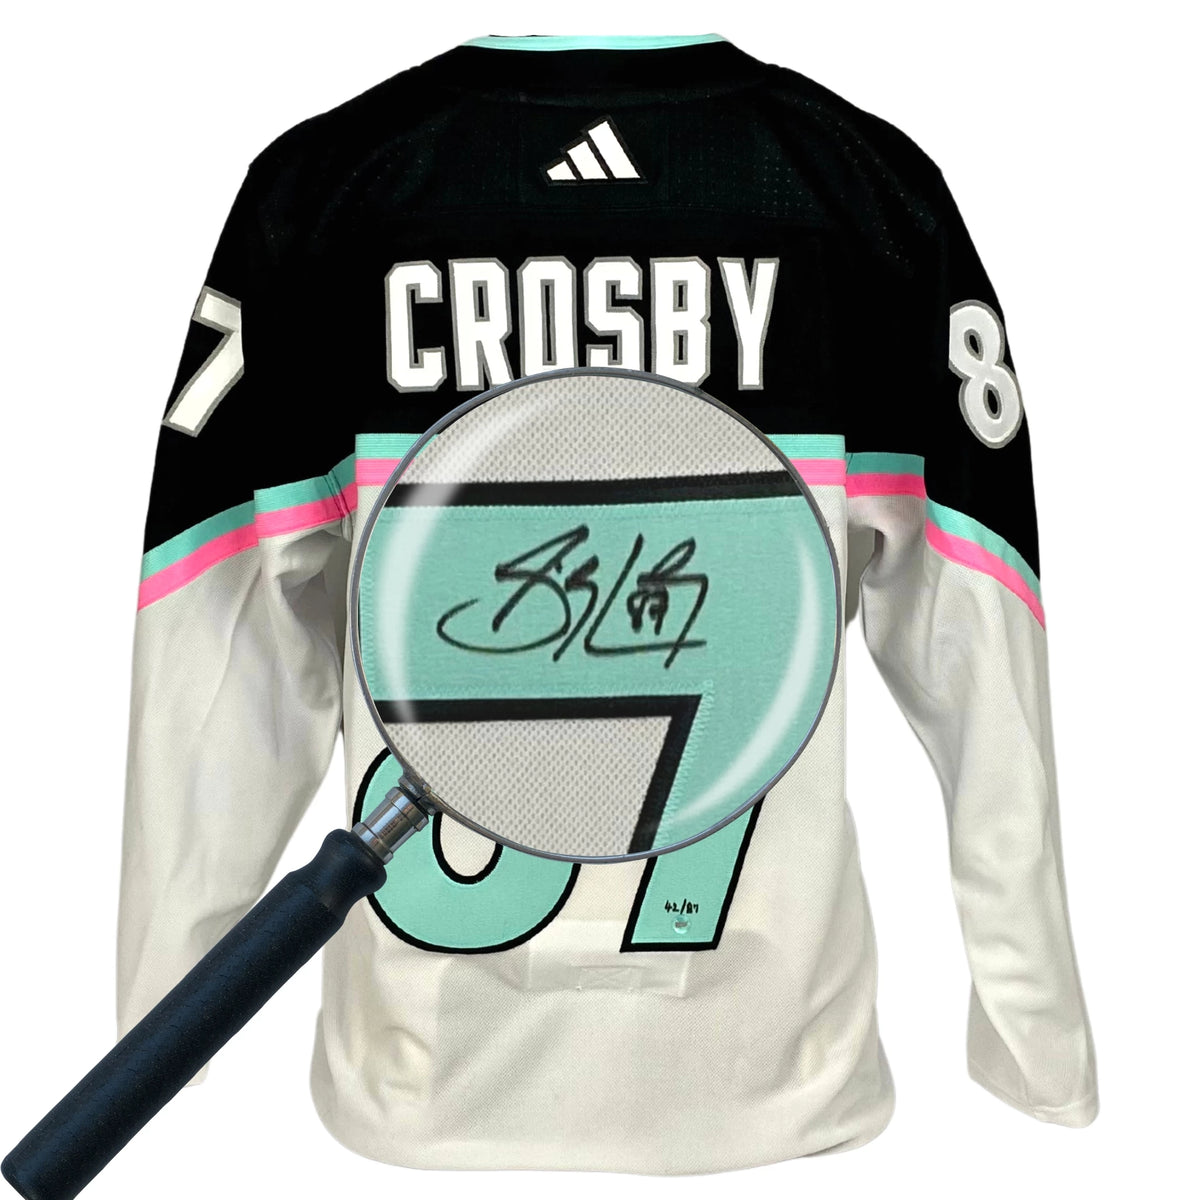 Sidney Crosby Signed Jersey Penguins Cream 2023 Winter Classic Adidas LE 87